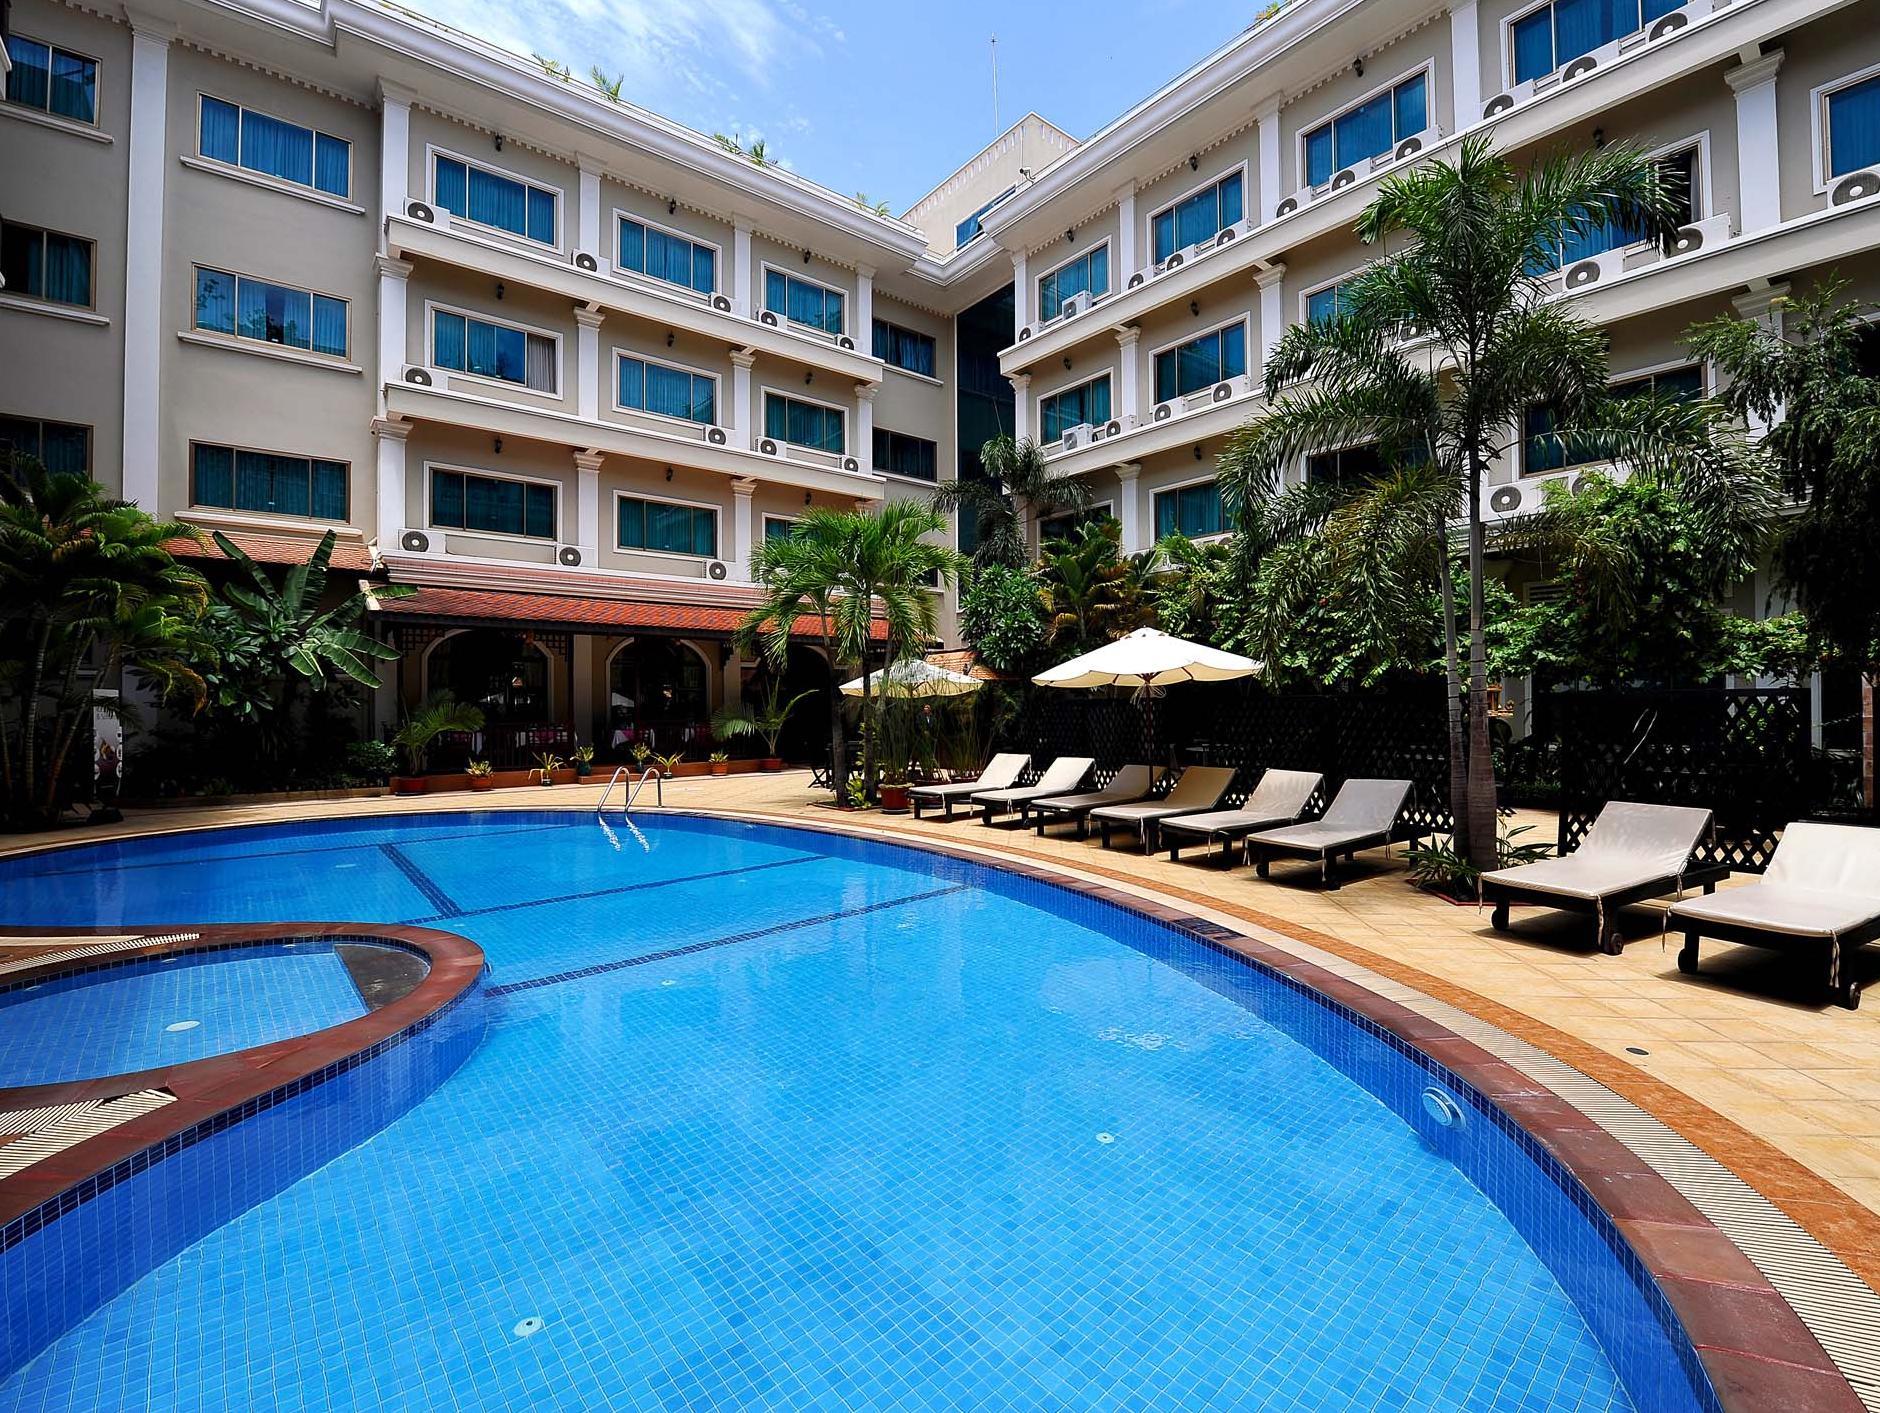 Angkor Holiday Hotel Siem Reap Province FAQ 2017, What facilities are there in Angkor Holiday Hotel Siem Reap Province 2017, What Languages Spoken are Supported in Angkor Holiday Hotel Siem Reap Province 2017, Which payment cards are accepted in Angkor Holiday Hotel Siem Reap Province , Siem Reap Province Angkor Holiday Hotel room facilities and services Q&A 2017, Siem Reap Province Angkor Holiday Hotel online booking services 2017, Siem Reap Province Angkor Holiday Hotel address 2017, Siem Reap Province Angkor Holiday Hotel telephone number 2017,Siem Reap Province Angkor Holiday Hotel map 2017, Siem Reap Province Angkor Holiday Hotel traffic guide 2017, how to go Siem Reap Province Angkor Holiday Hotel, Siem Reap Province Angkor Holiday Hotel booking online 2017, Siem Reap Province Angkor Holiday Hotel room types 2017.